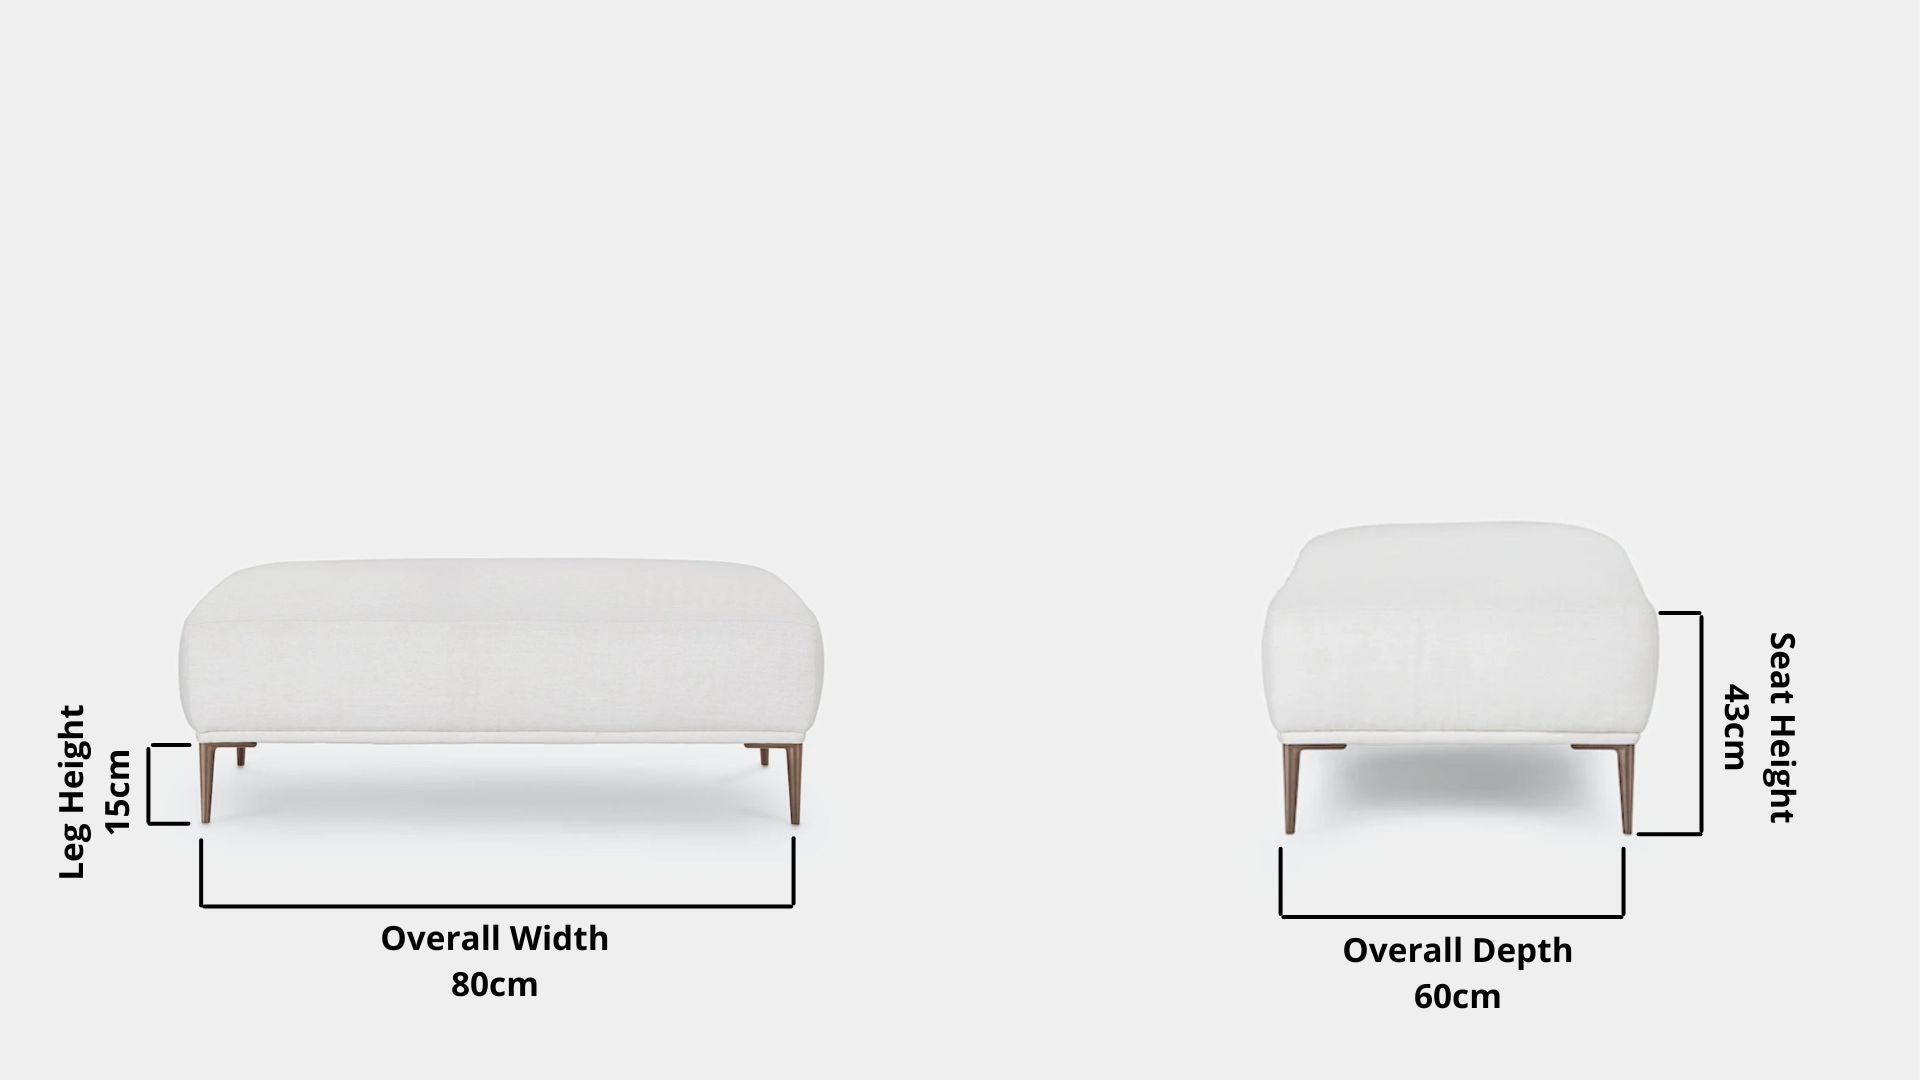 Details the key dimensions in terms of overall width, overall depth and seat width for Crystal Fabric Ottoman